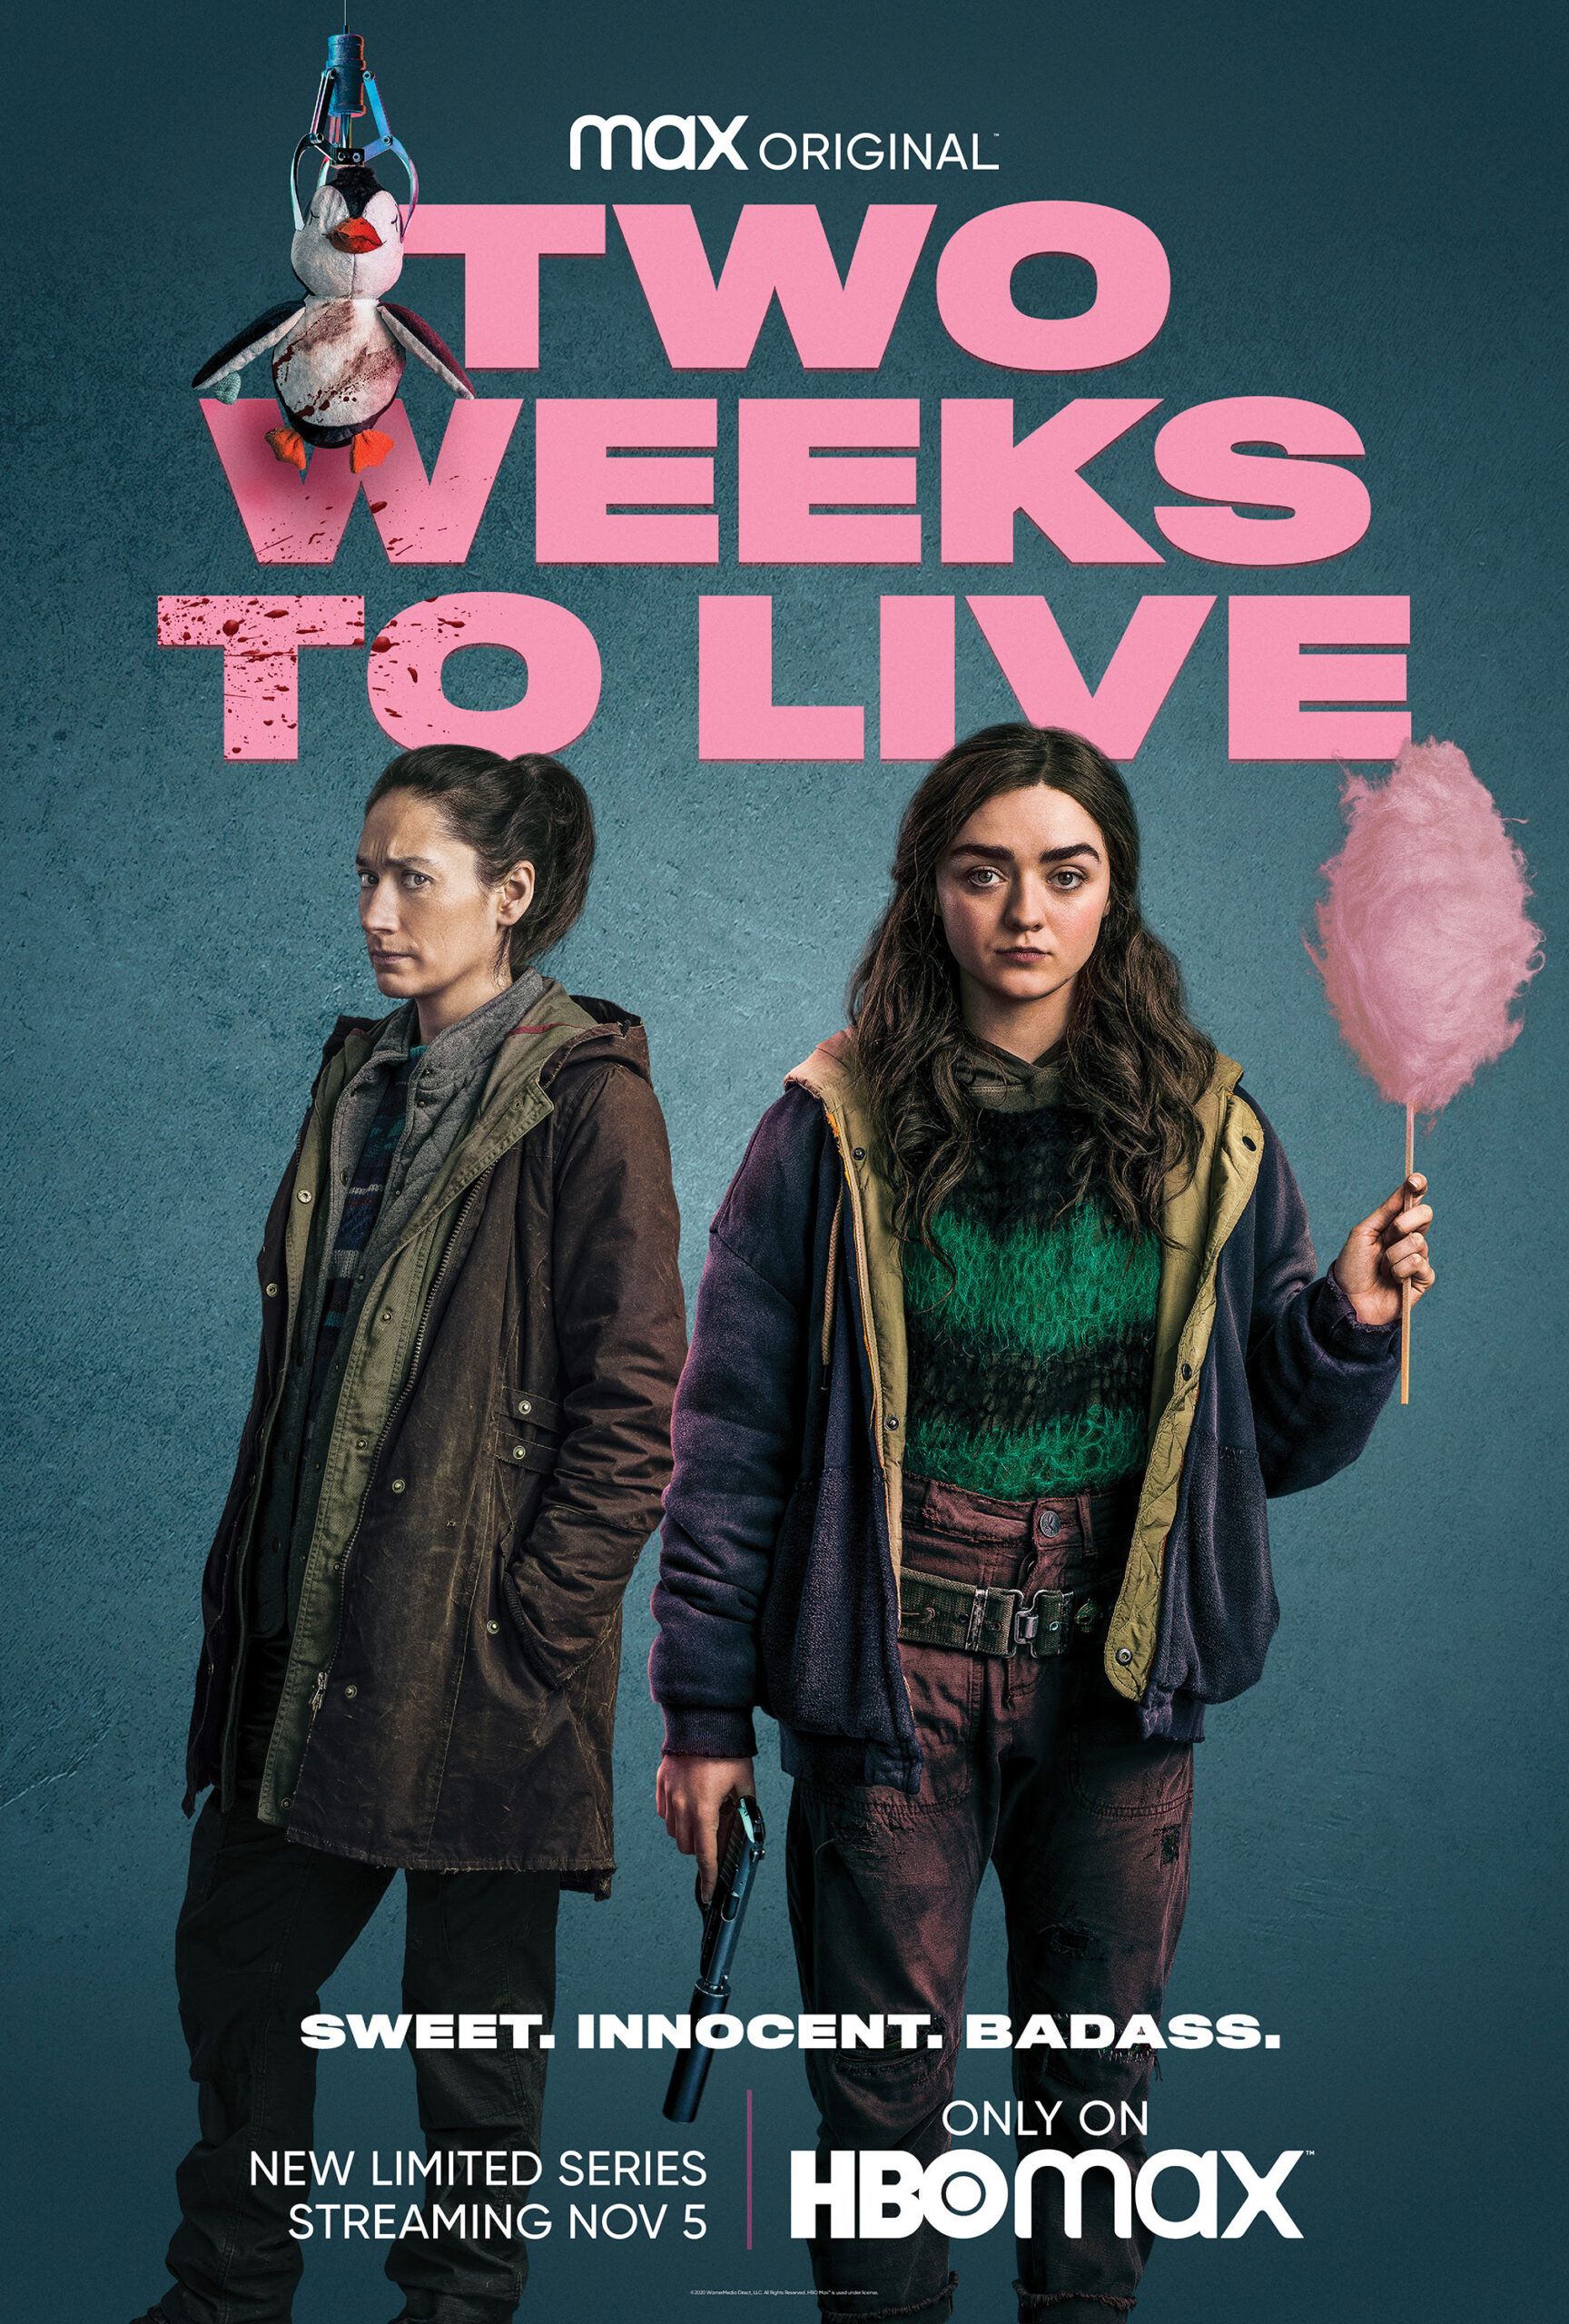 [News] Maisie Williams Embraces Revenge in TWO WEEKS TO LIVE Trailer